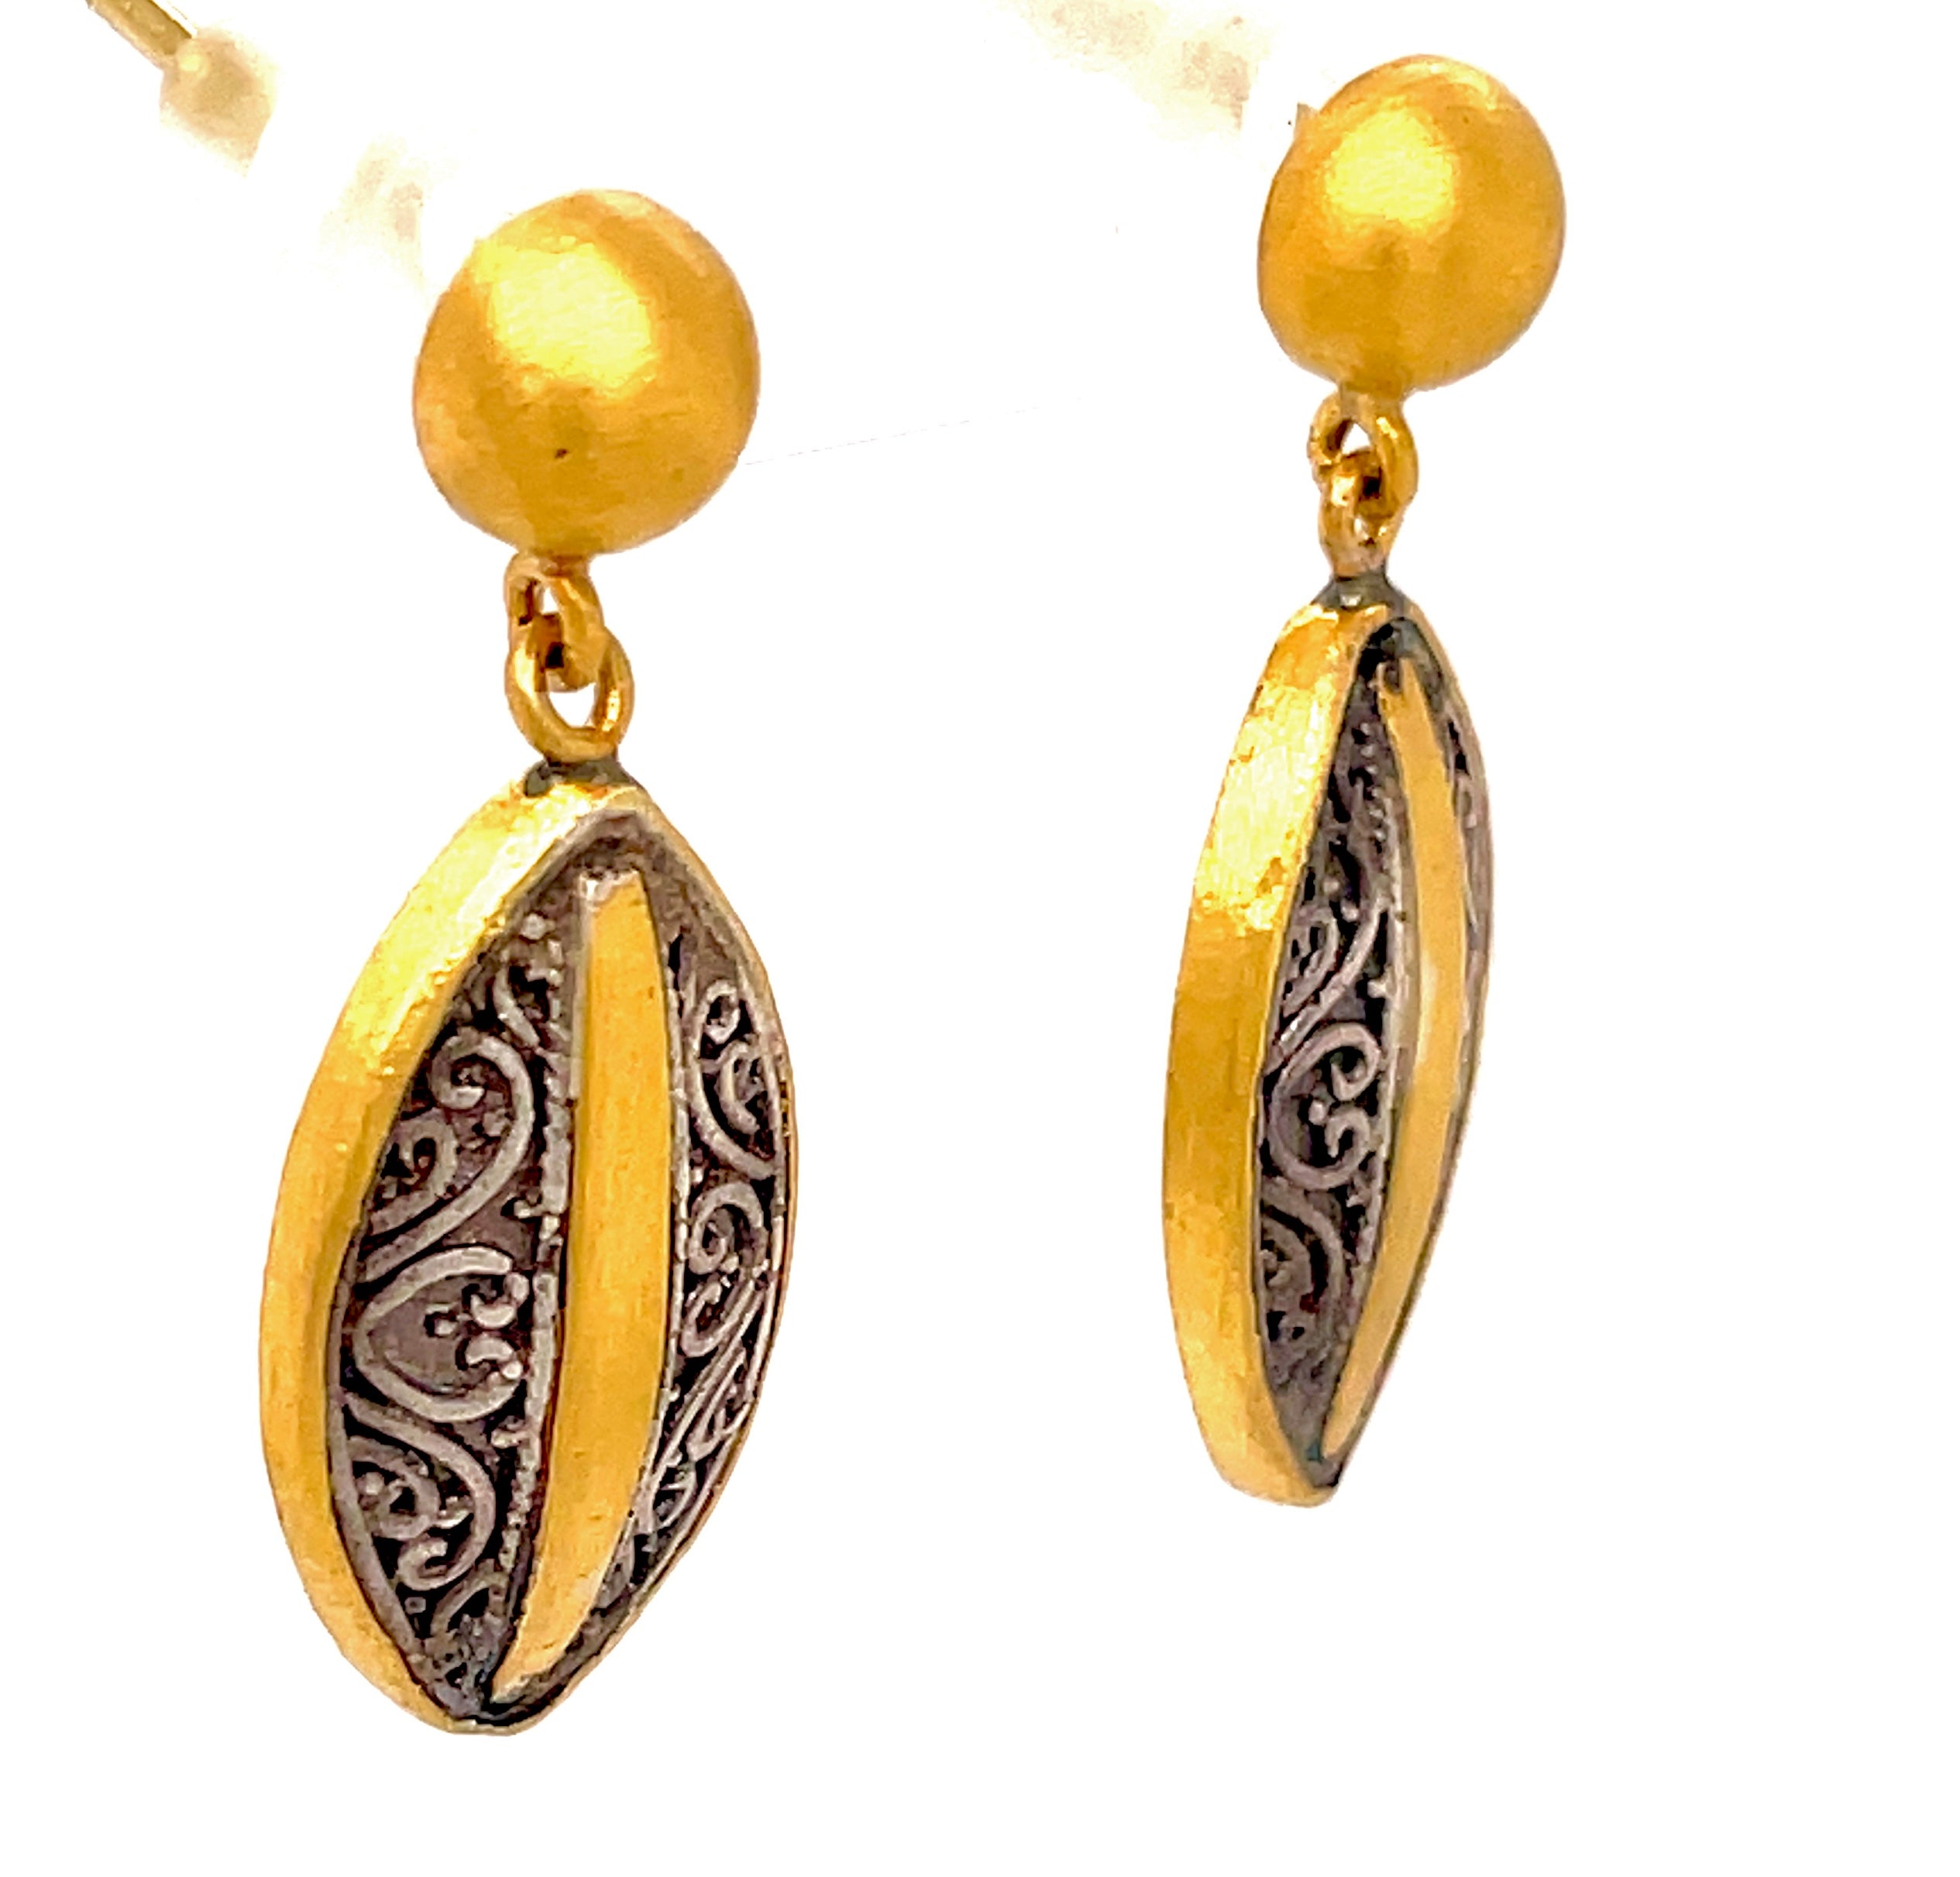 A unique combination of modern style, secure fit, and luxurious detail, these drop earrings are crafted with 24K gold and oxidized sterling silver for an eye-catching finish. Handmade in Turkey, this pair is sure to become a treasured addition to your collection.